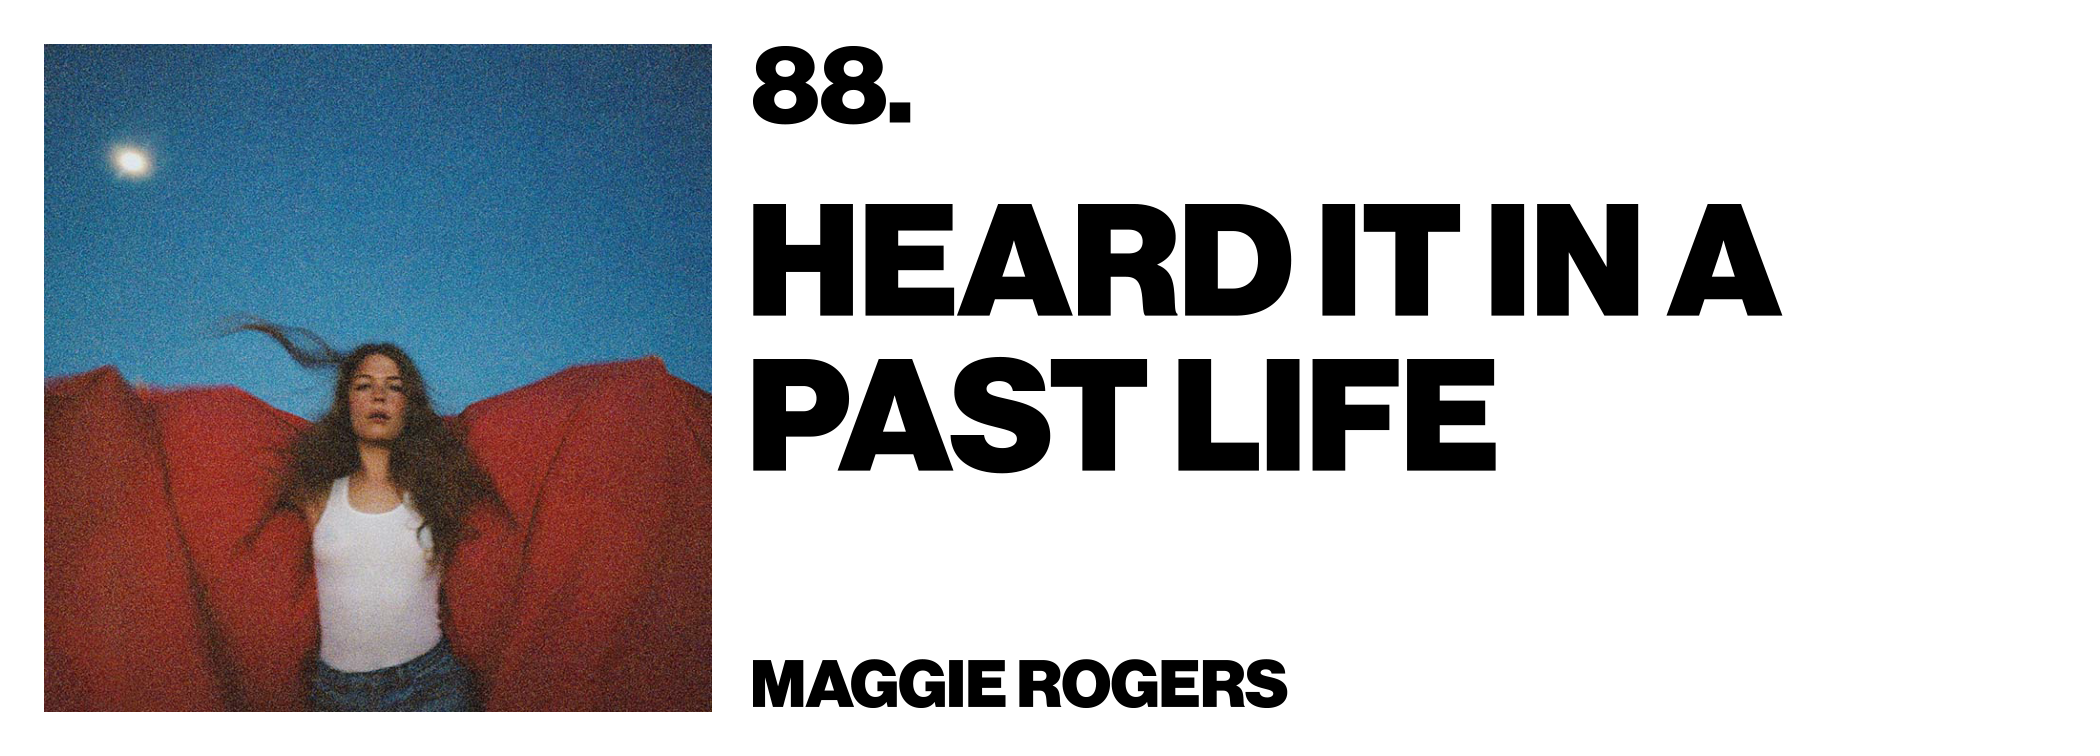 1575920479381-88-Maggie-Rogers-Heard-It-In-a-Past-Life